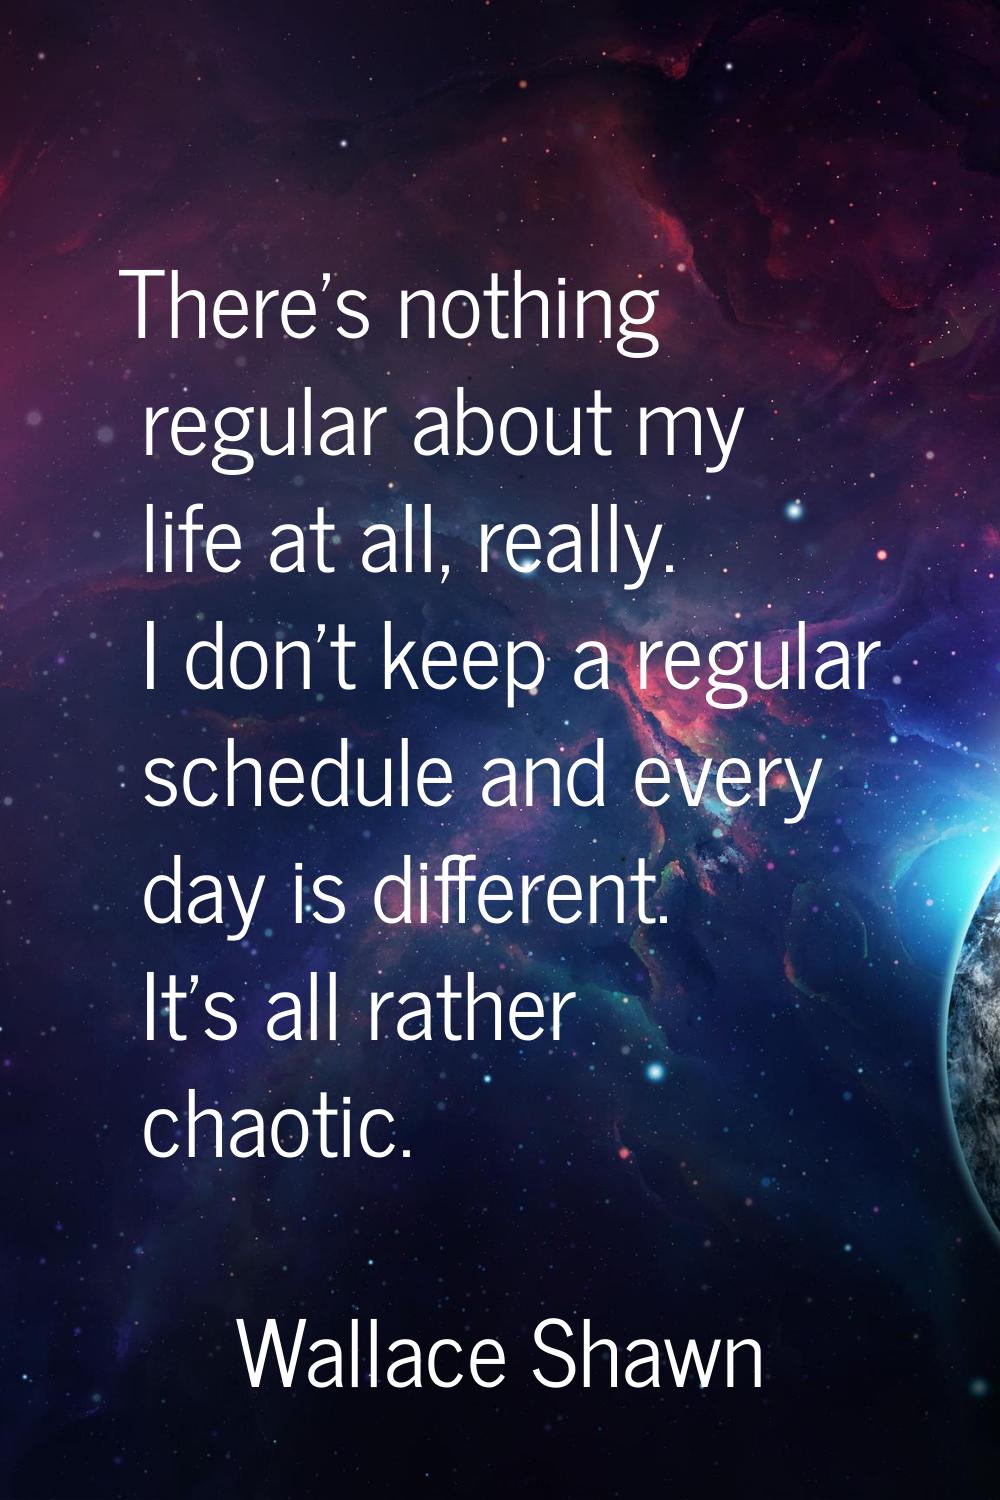 There's nothing regular about my life at all, really. I don't keep a regular schedule and every day